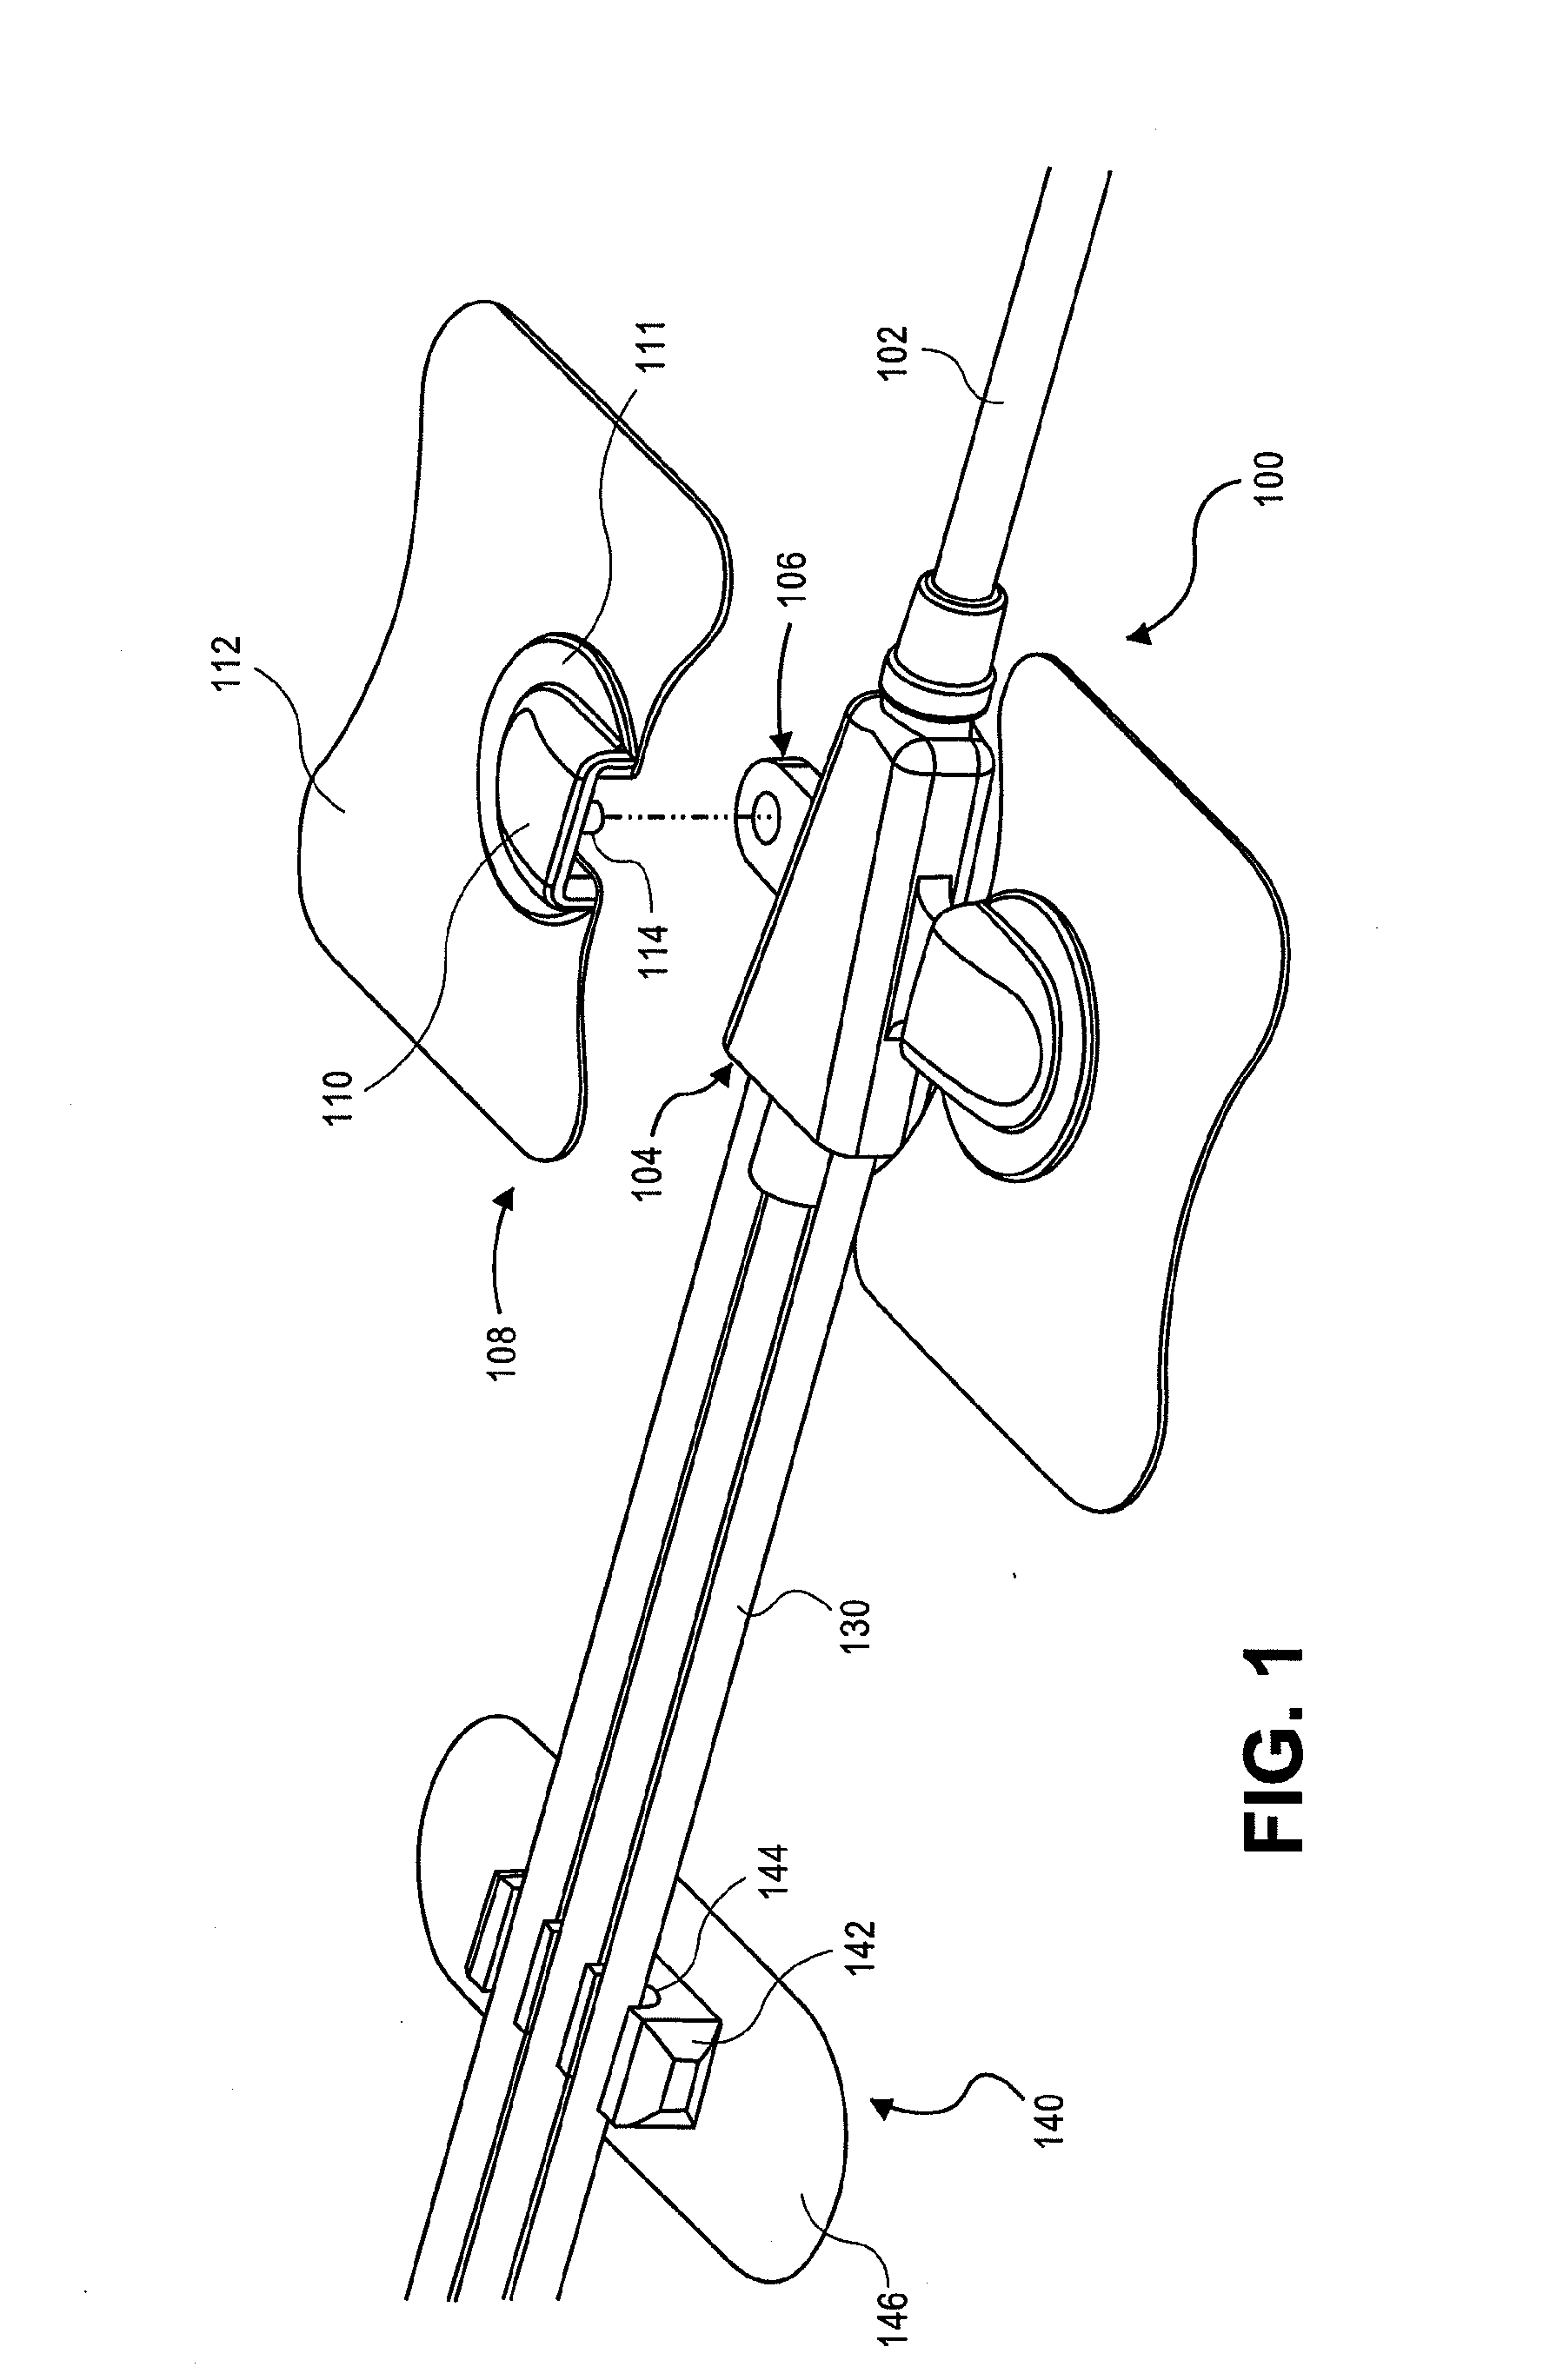 Catheter securement devices